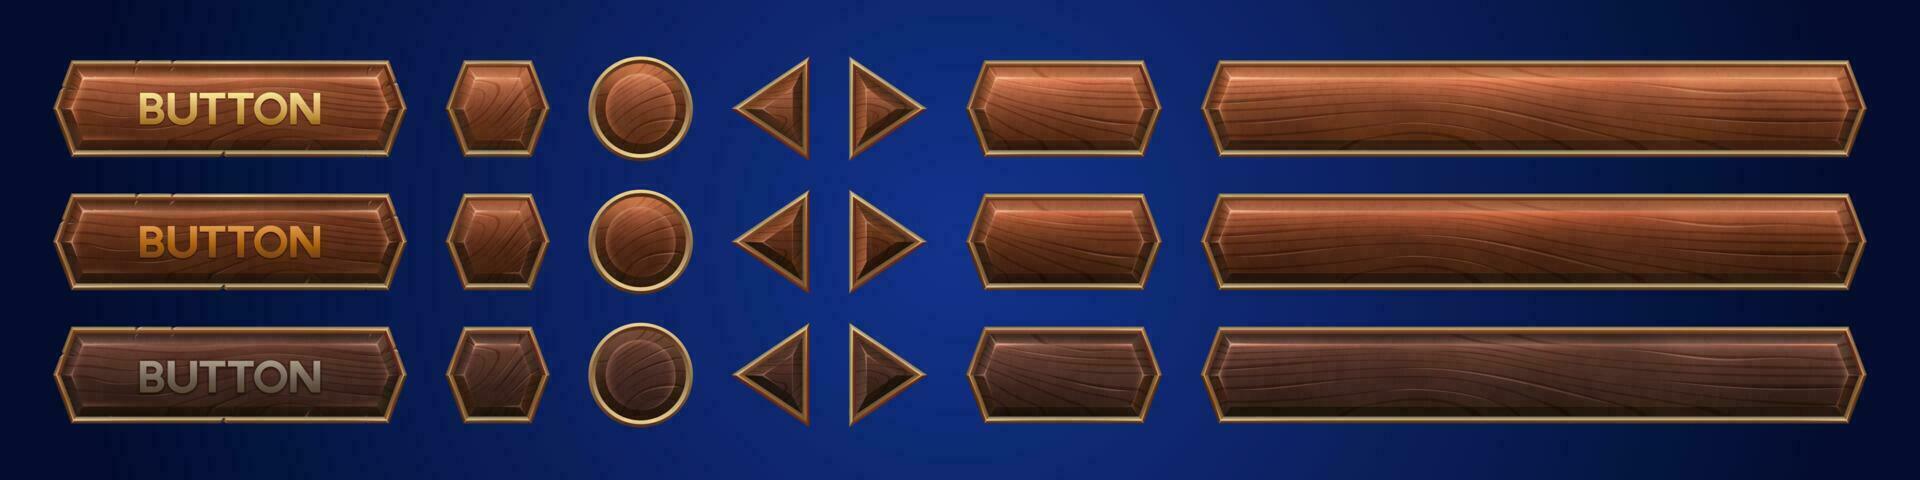 Realistic set of wooden game buttons sprite sheet vector